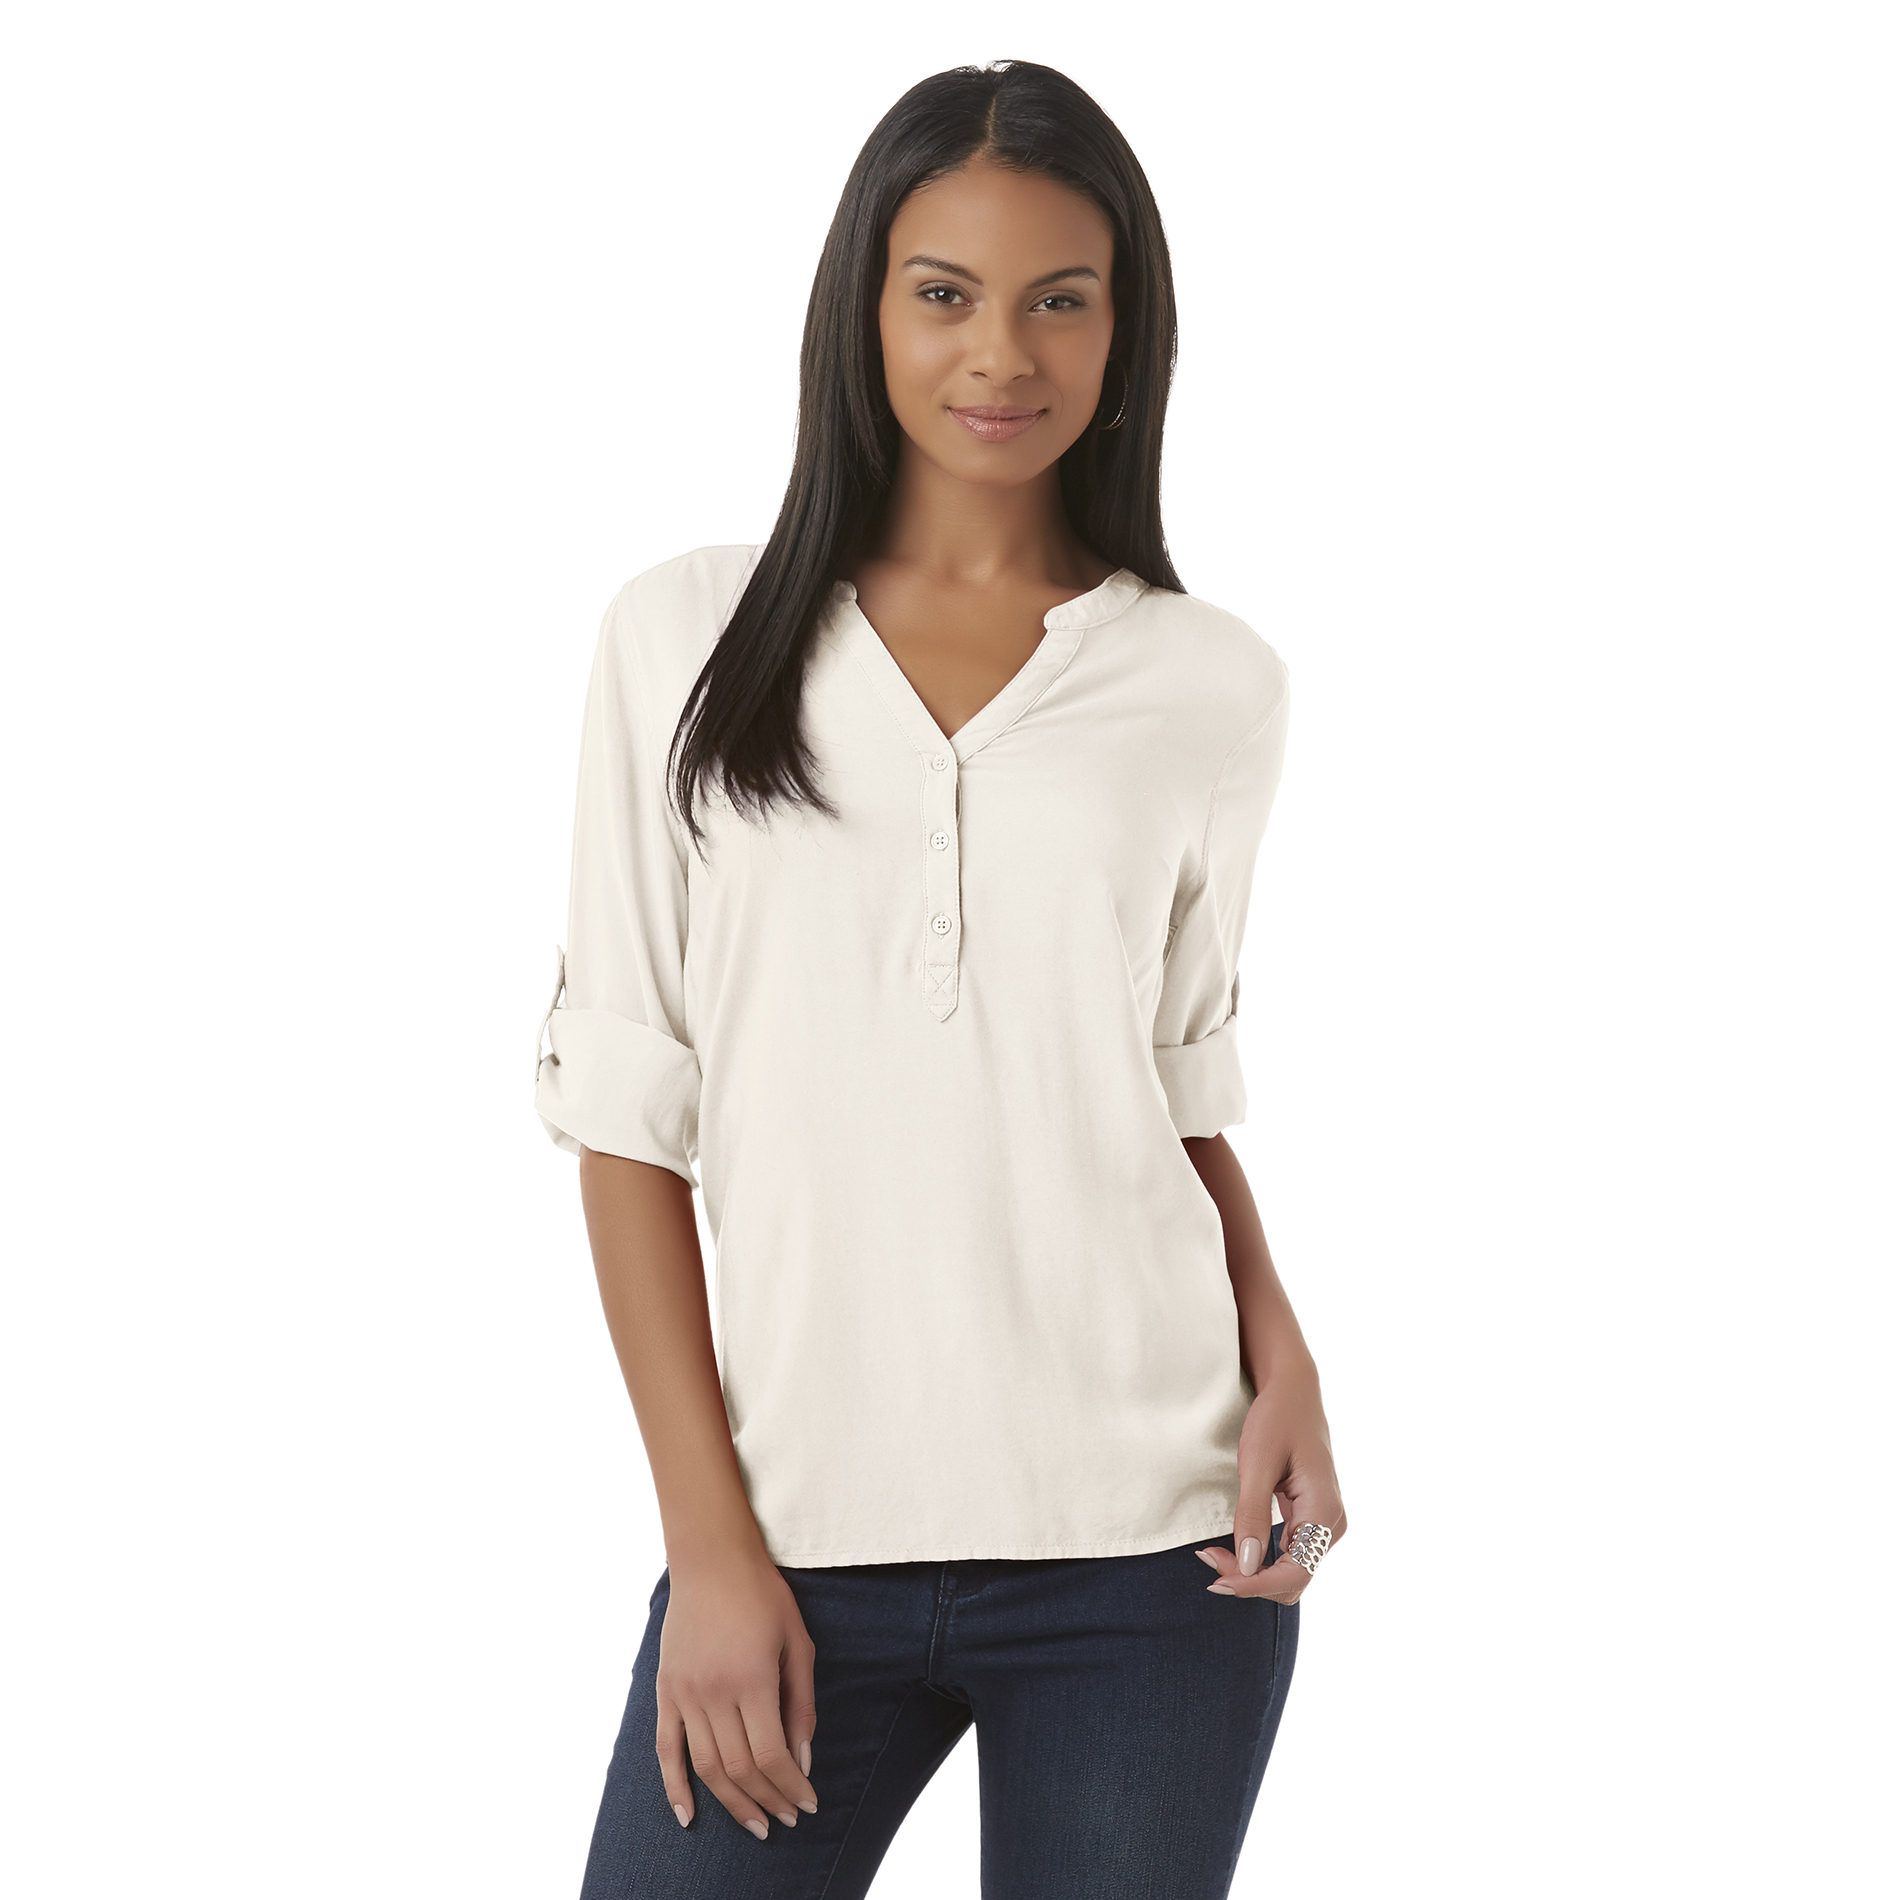 Simply Styled Women's Woven Henley Shirt